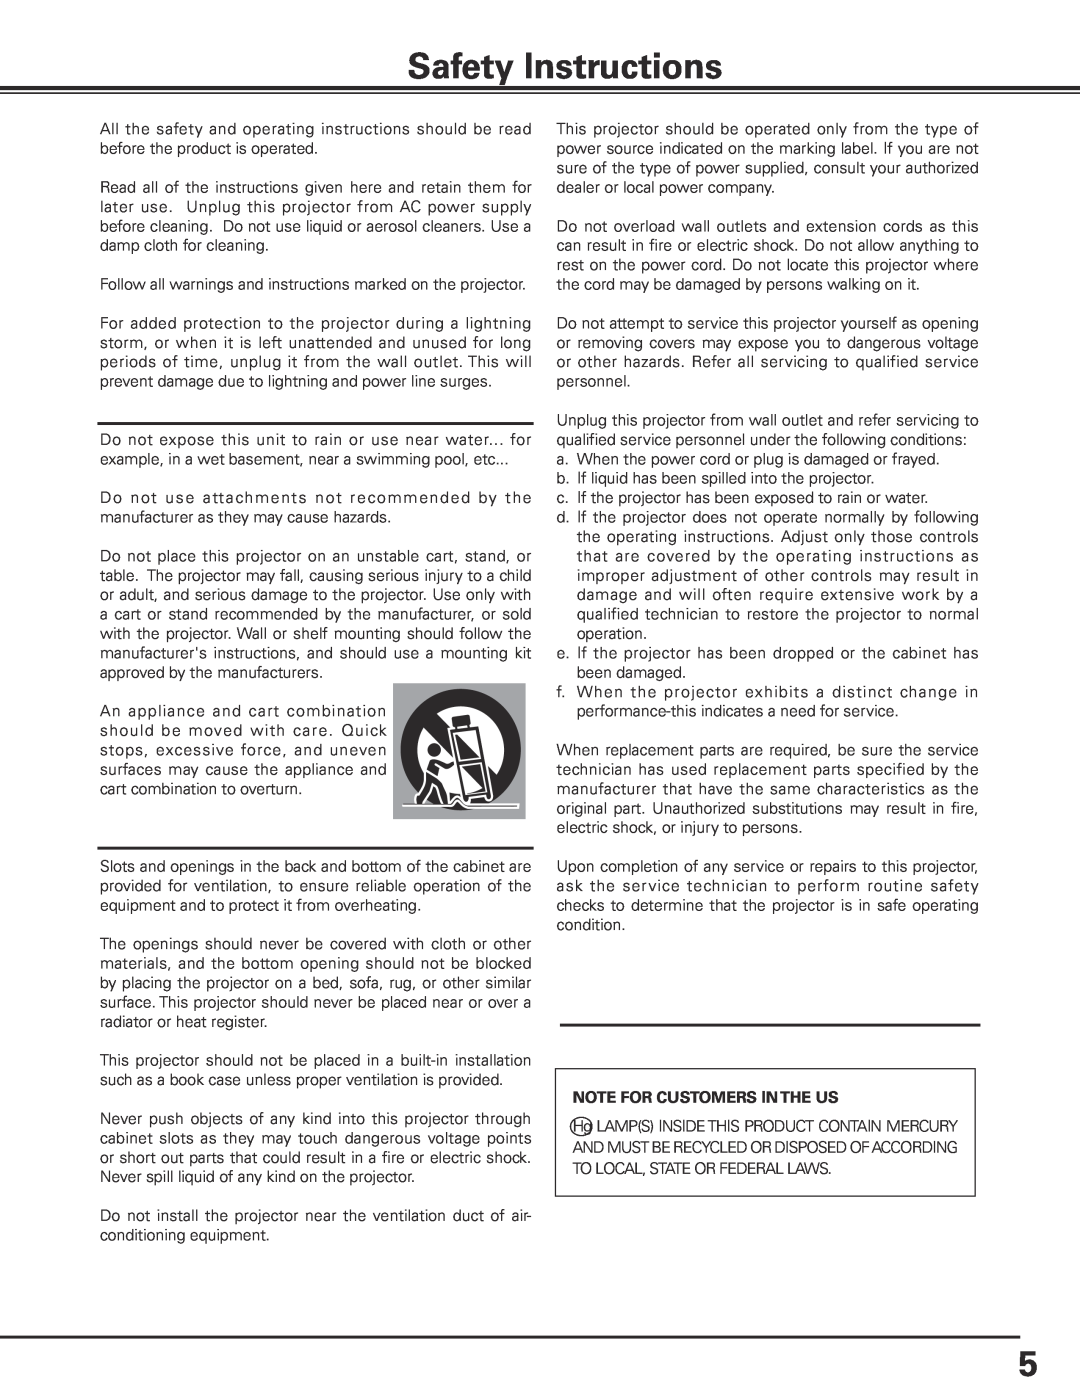 Sanyo HF15000L owner manual Safety Instructions, Note For Customers In The Us 